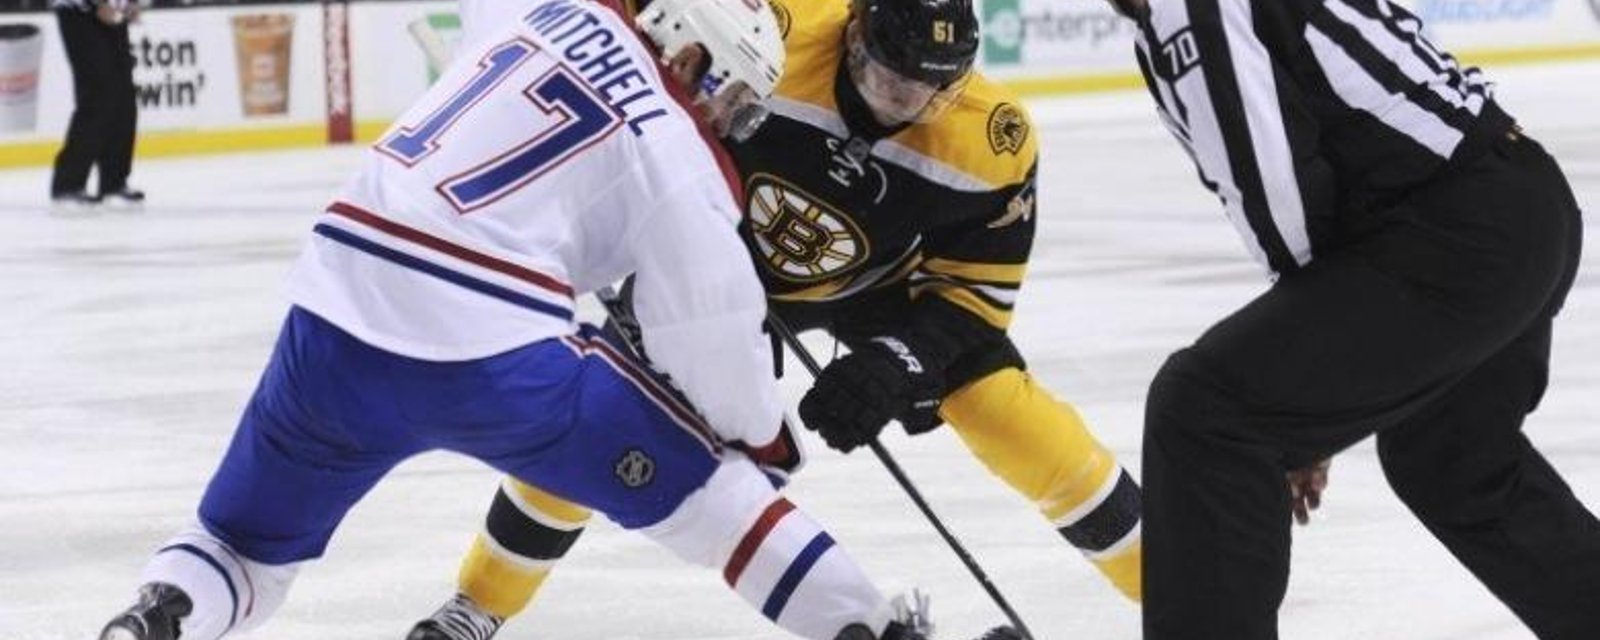 Bruins Aim To Heap More Misery On Canadiens In Montreal